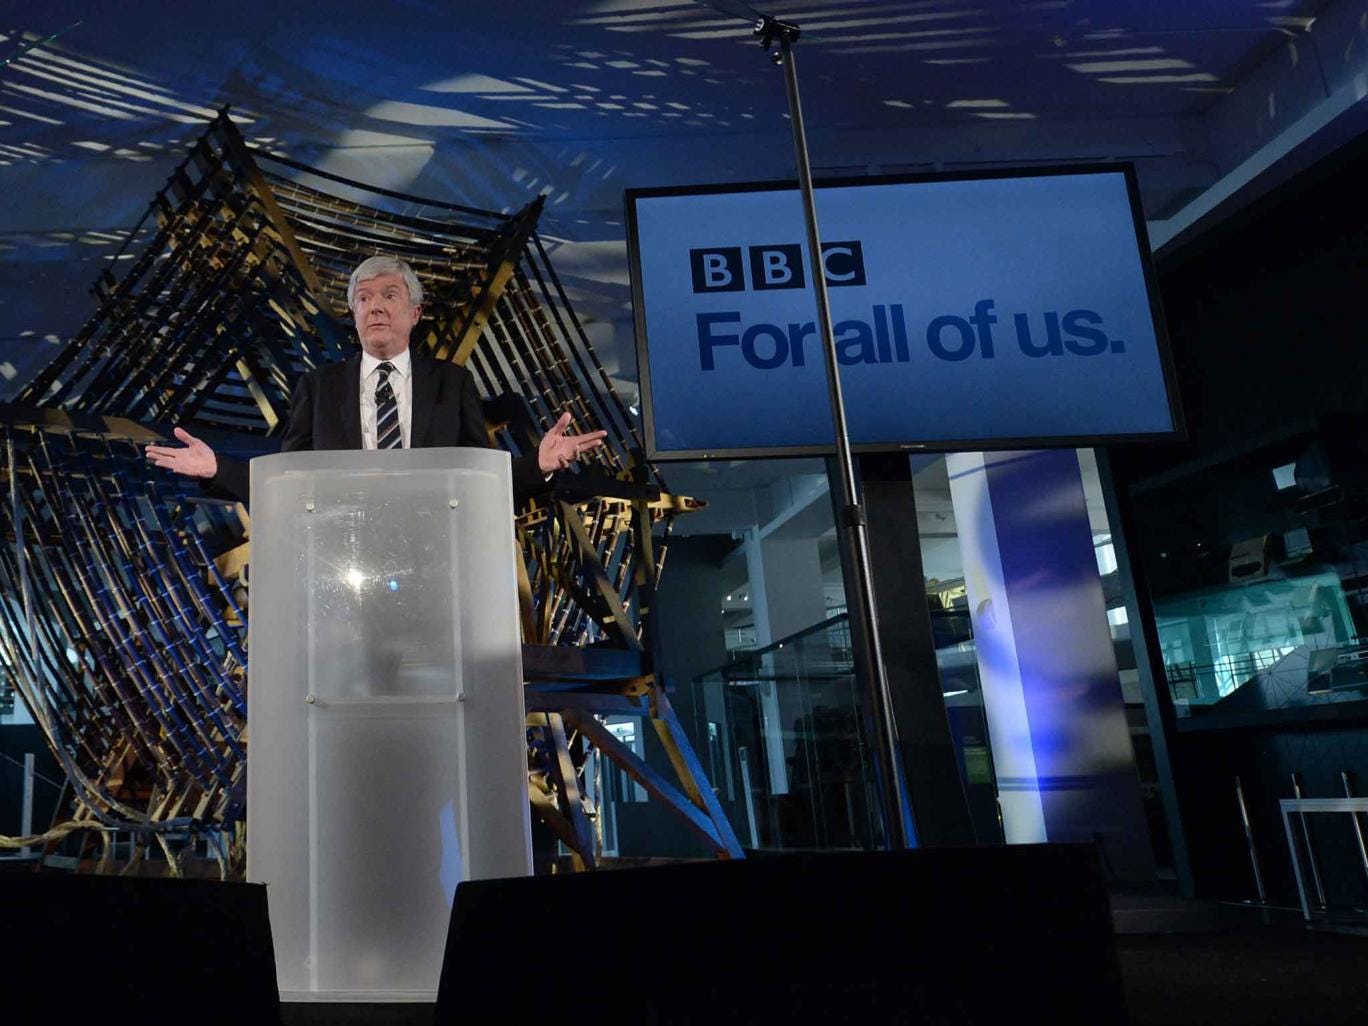 BBC head Tony Hall unveils new proposals for the corporation in a speech last week at the Science Museum, London